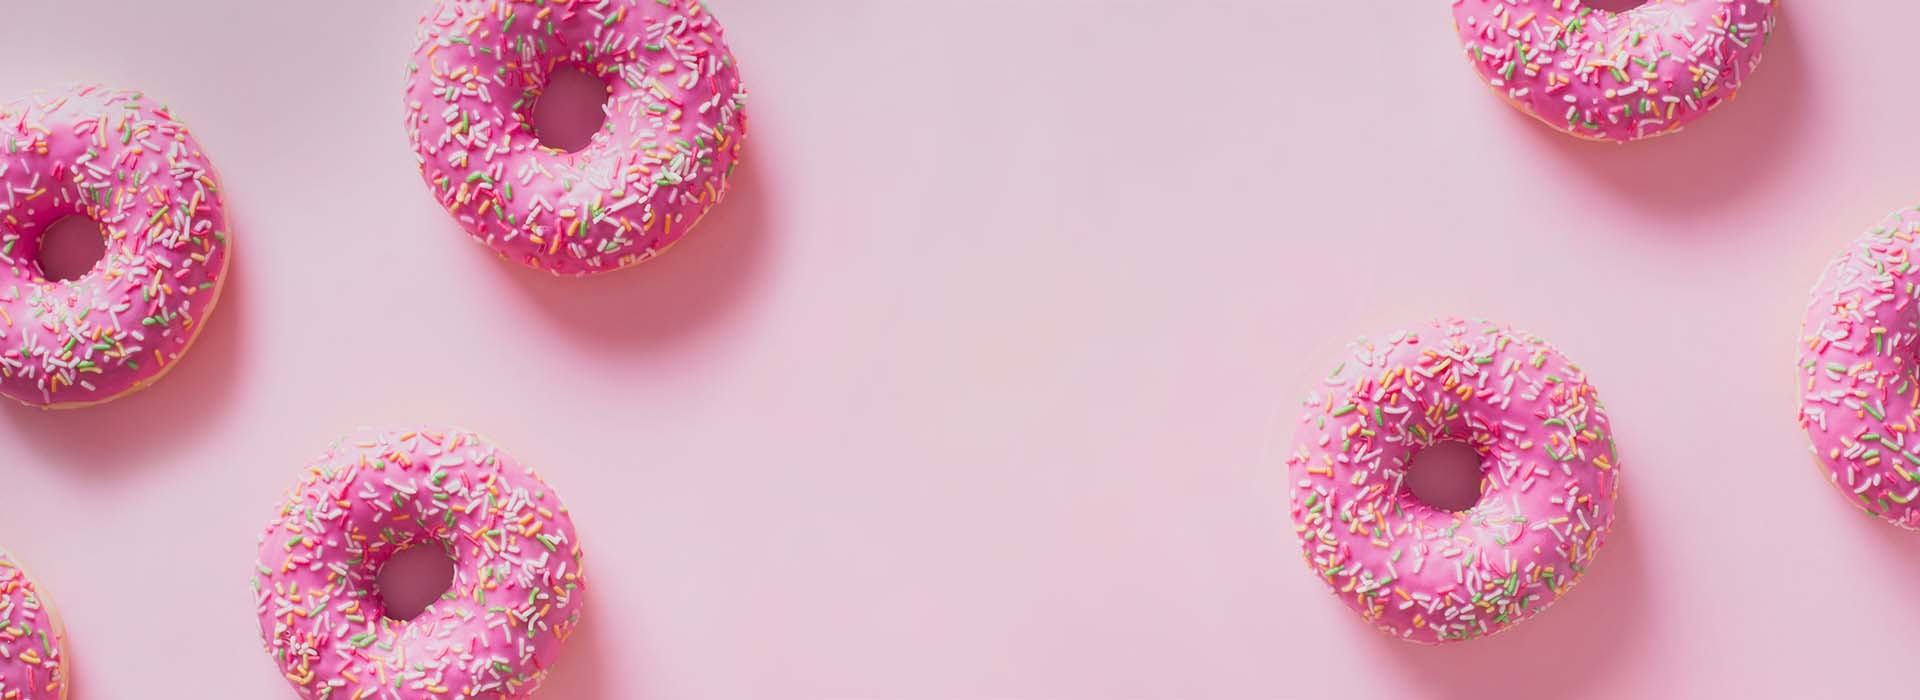 A pattern of pink, spinkle-covered doughnuts on a light pink background.